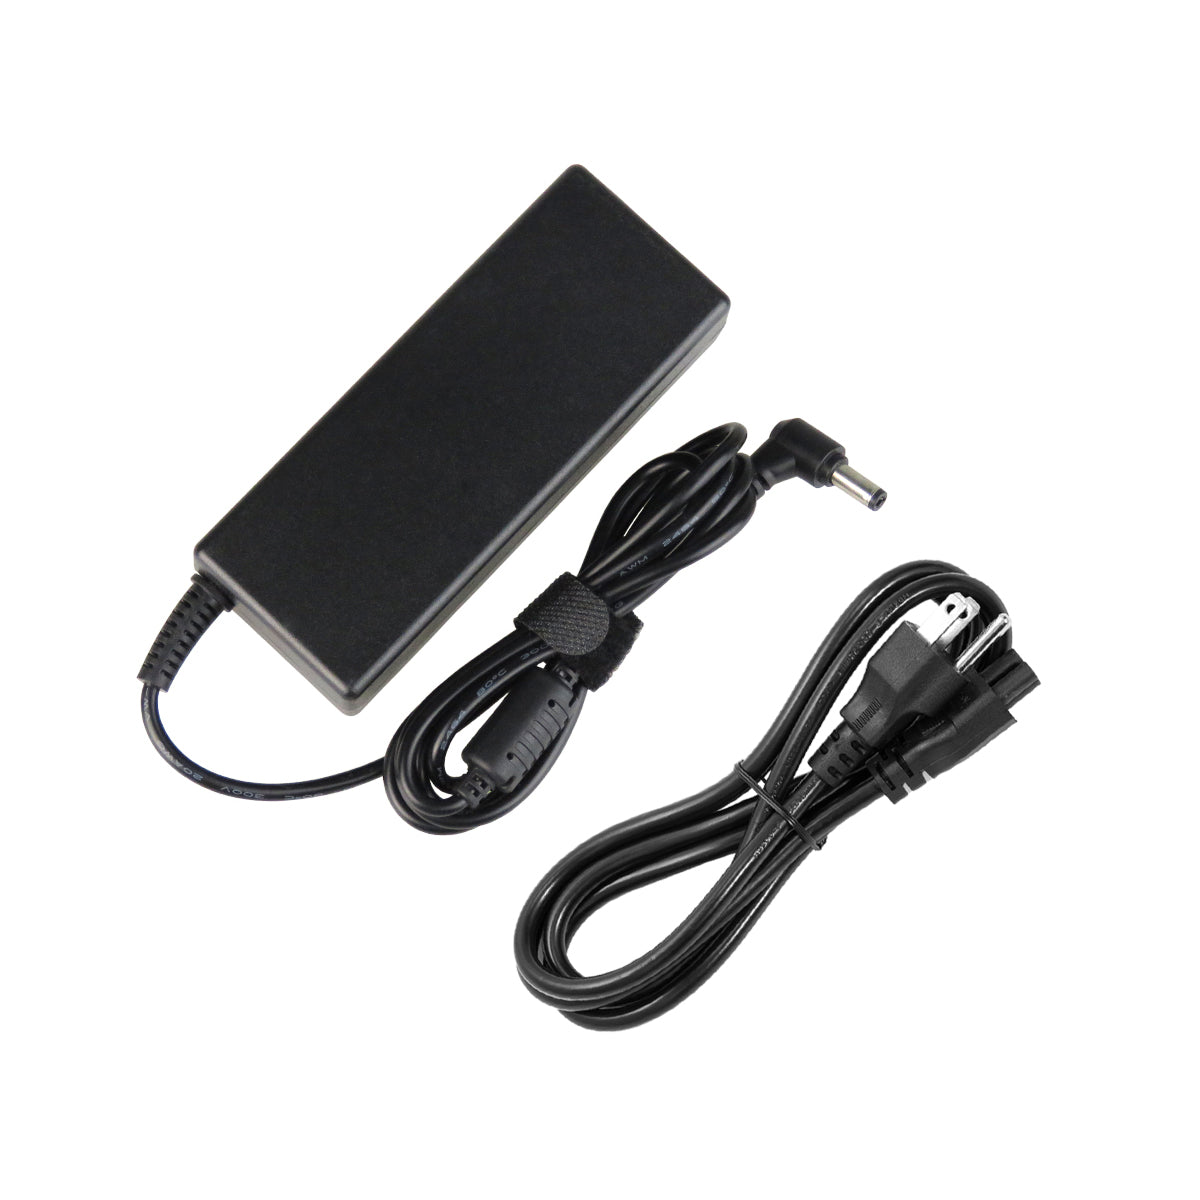 AC Adapter Charger for ASUS K55N Laptop.